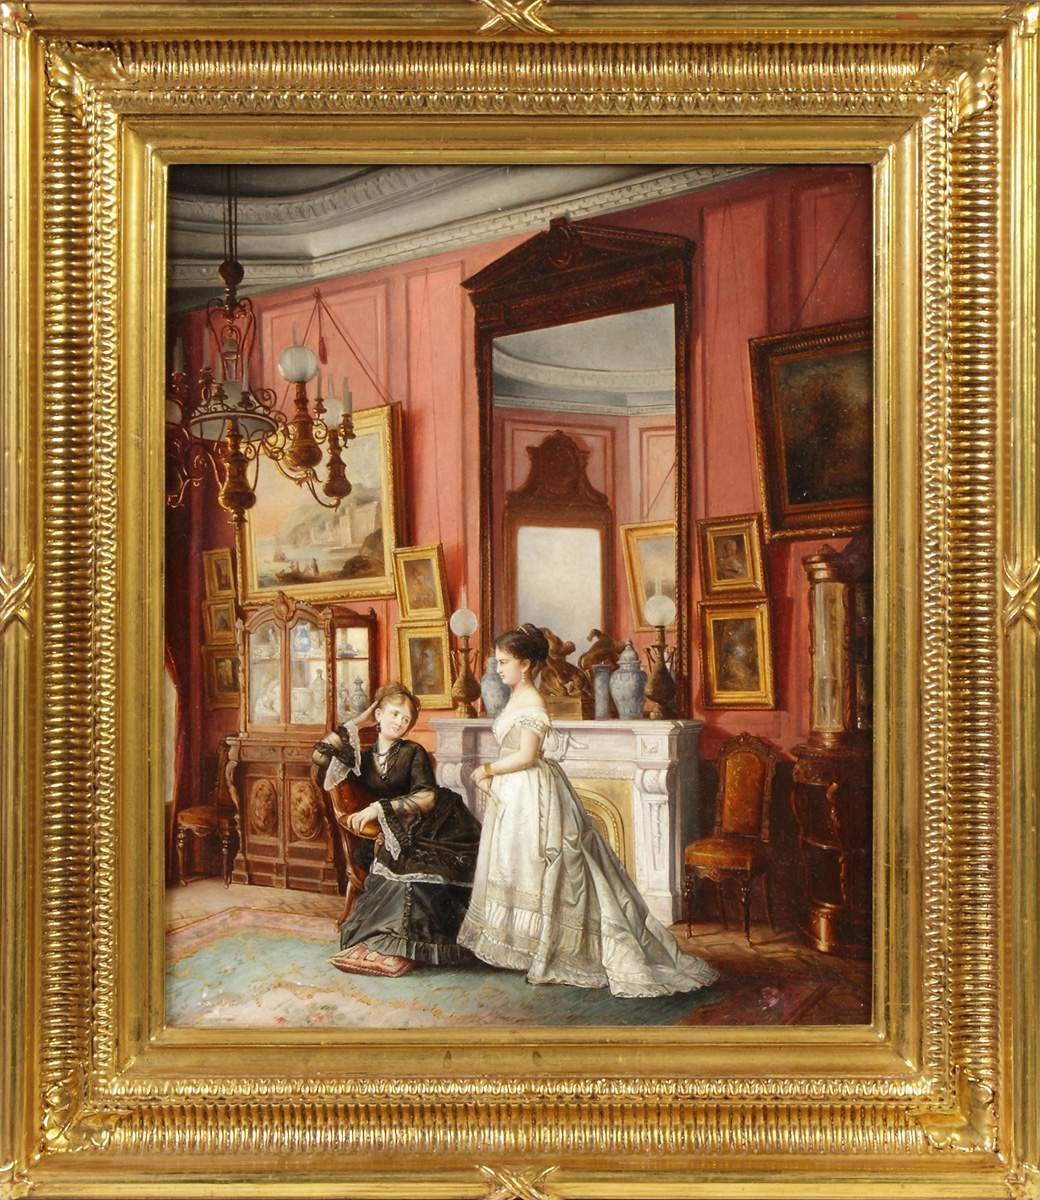 19th cent. English Victorian Parlor Scene | Cottone Auctions